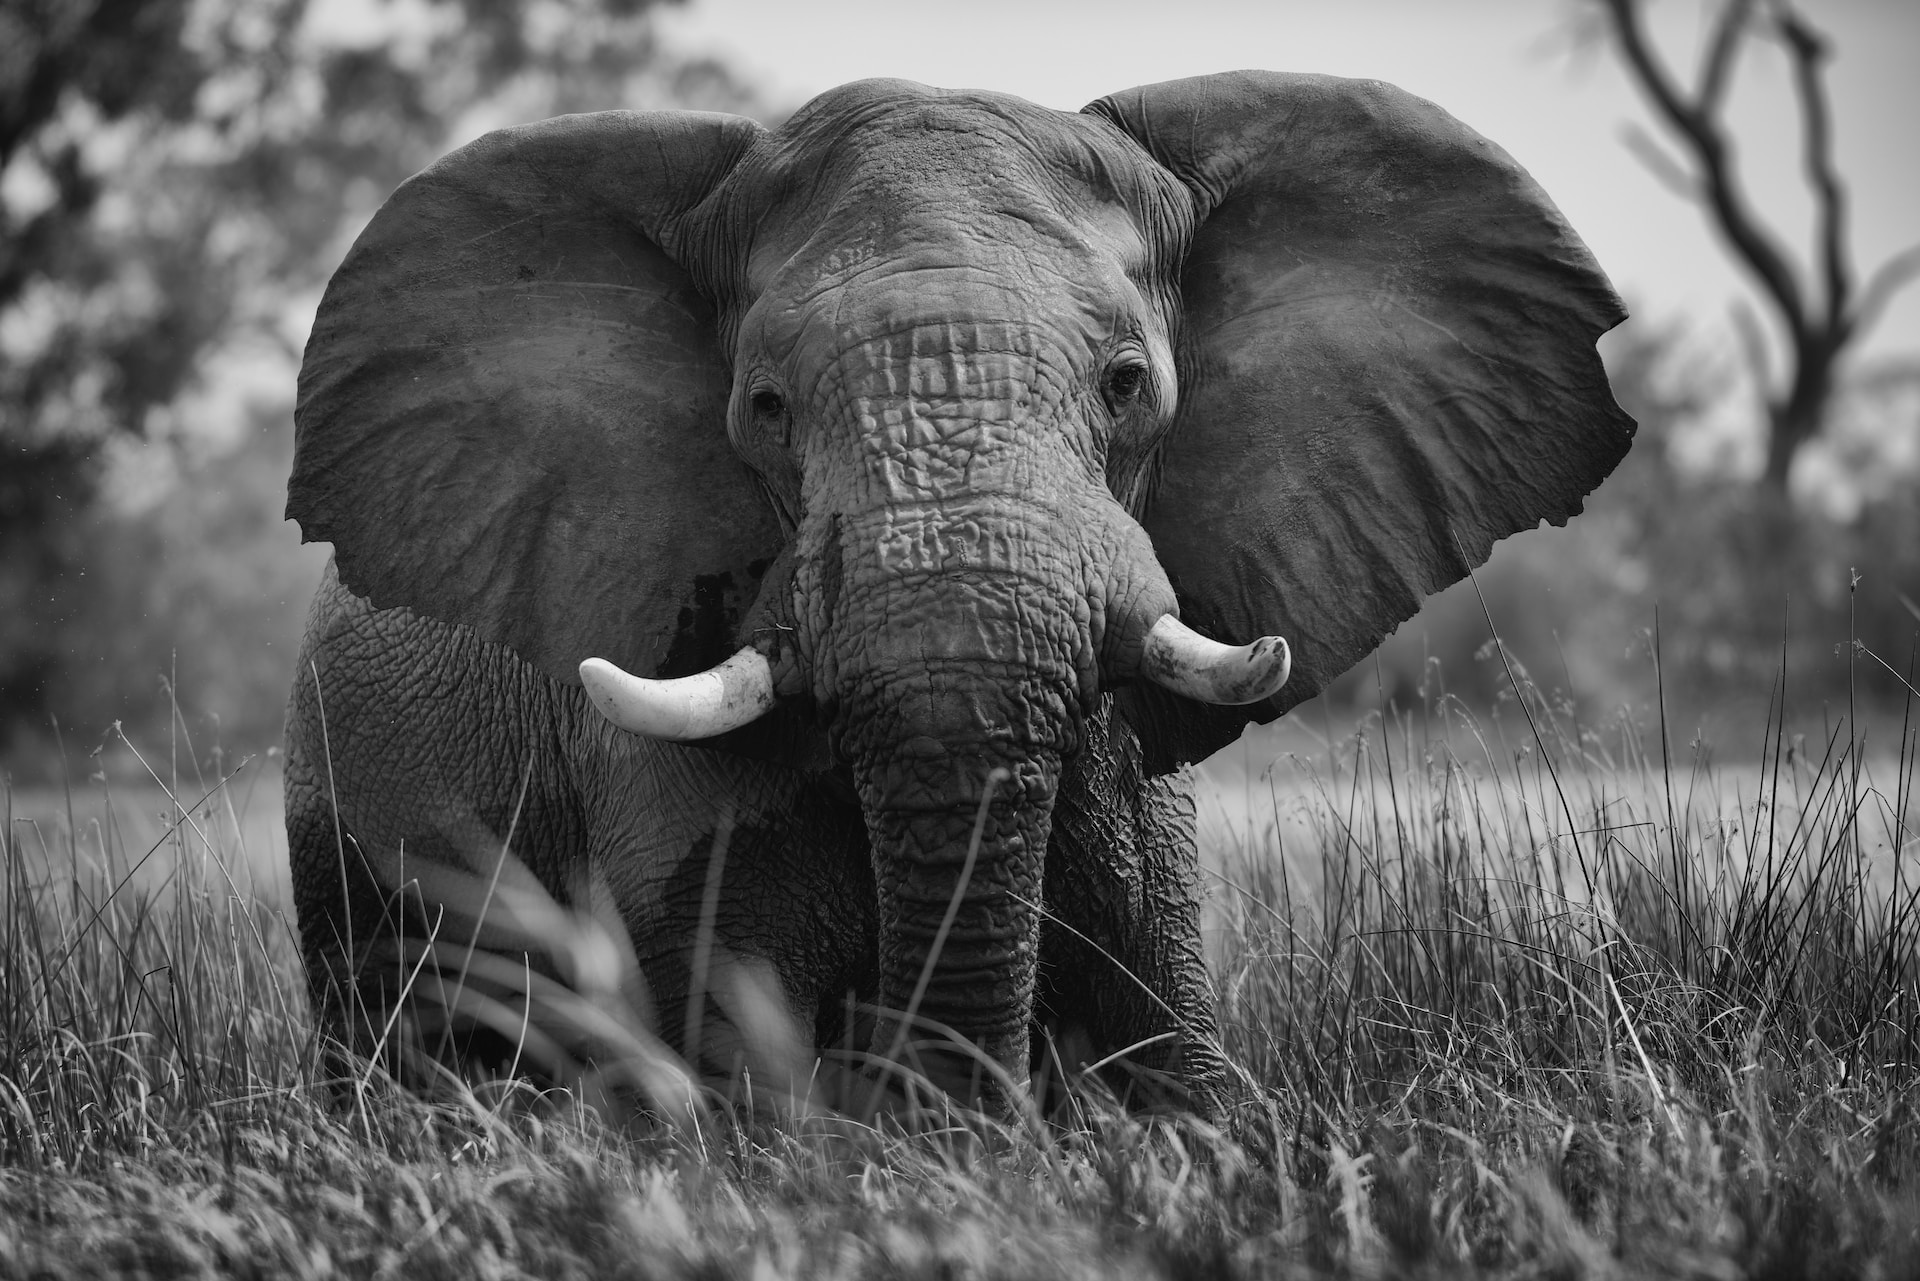 Elephants in Peril: The Fascinating World of African and Asian Giants | Conservation Efforts